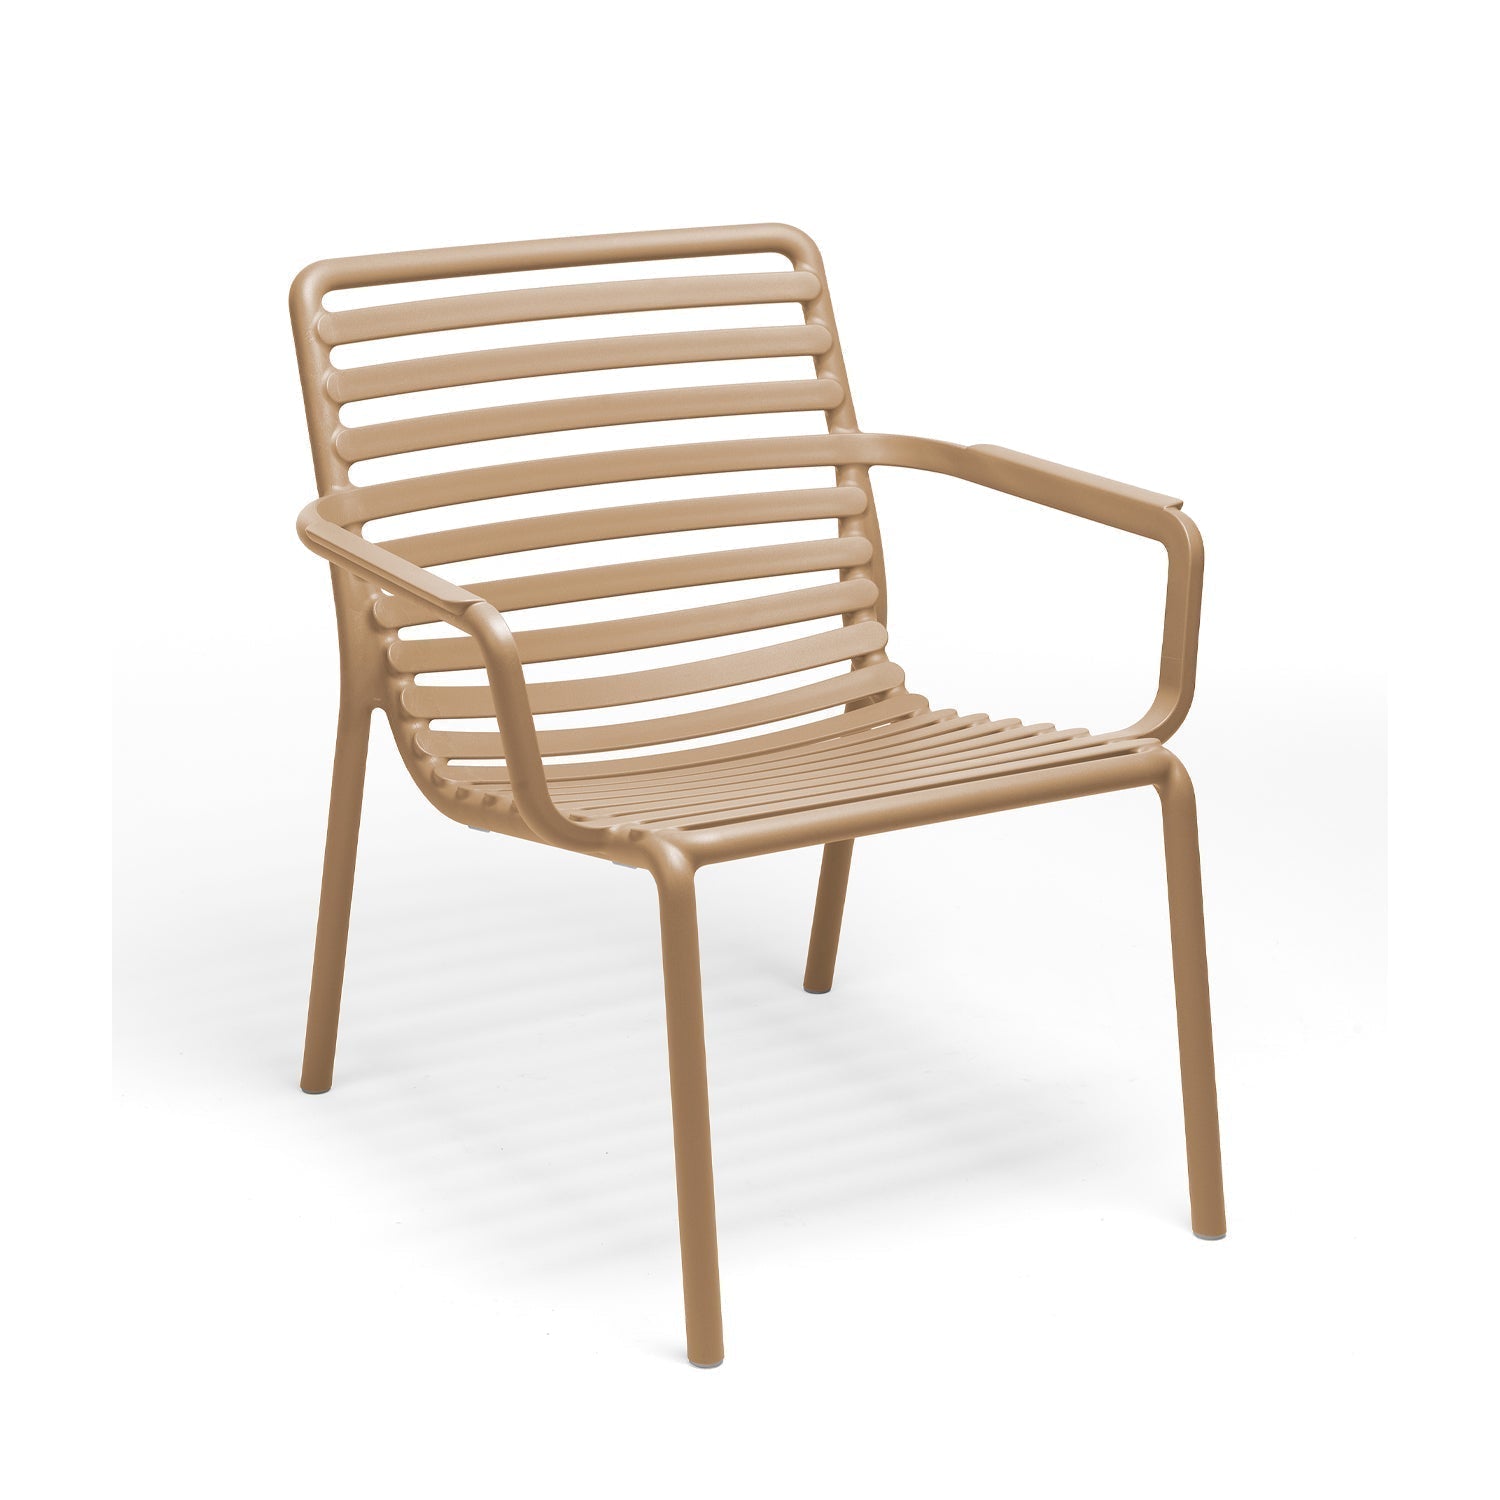 Doga Relax Garden Chair By Nardi In Cappuccino